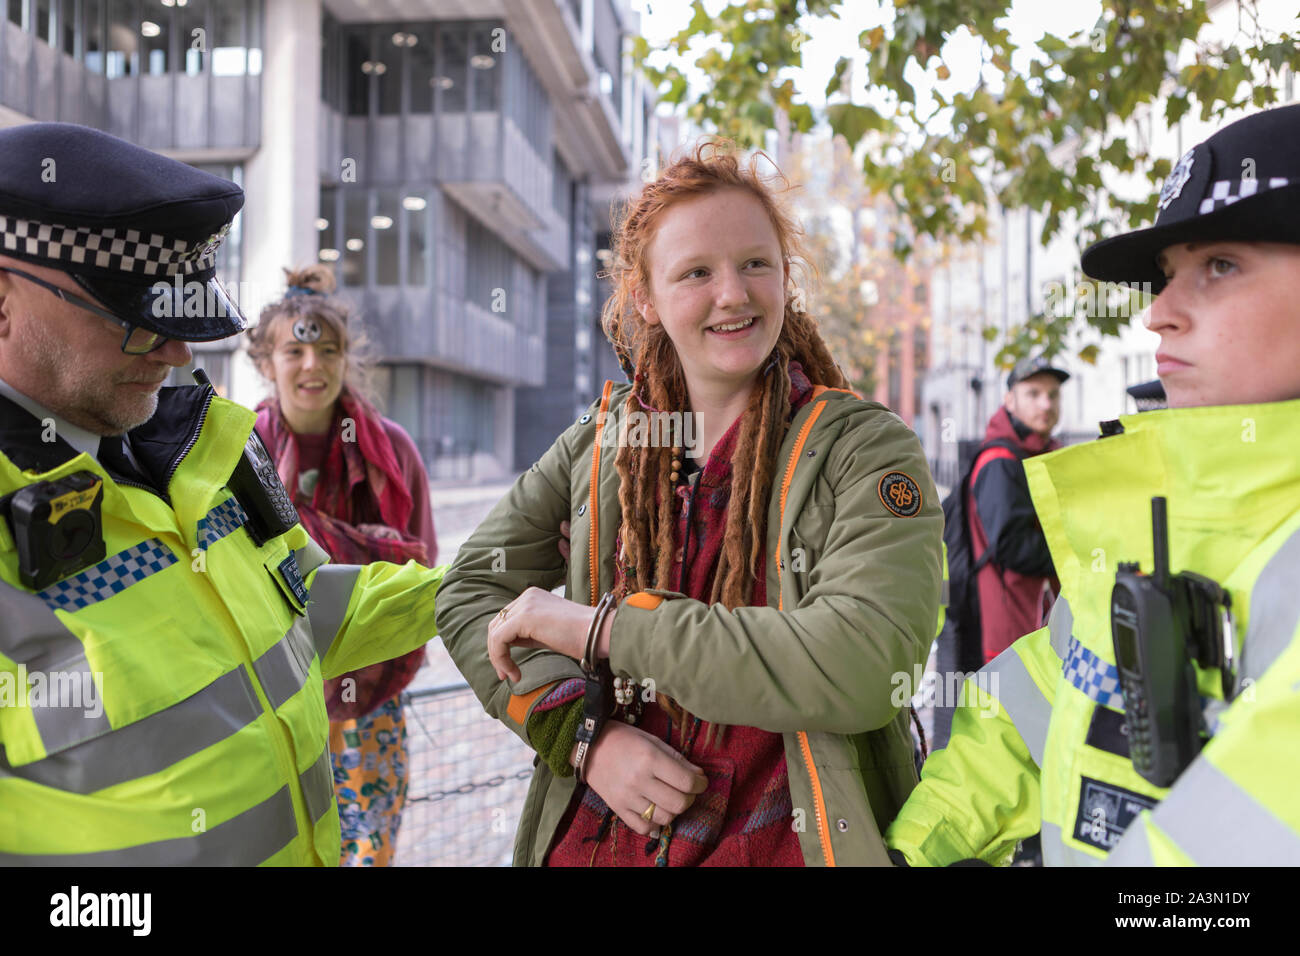 Westminster, London, UK. 9th Oct, 2019. Big police push to clear protesters from the Westminster Abbey area. Many arrests and police confiscate tents and equipment. Penelope Barritt/Alamy Live News Stock Photo